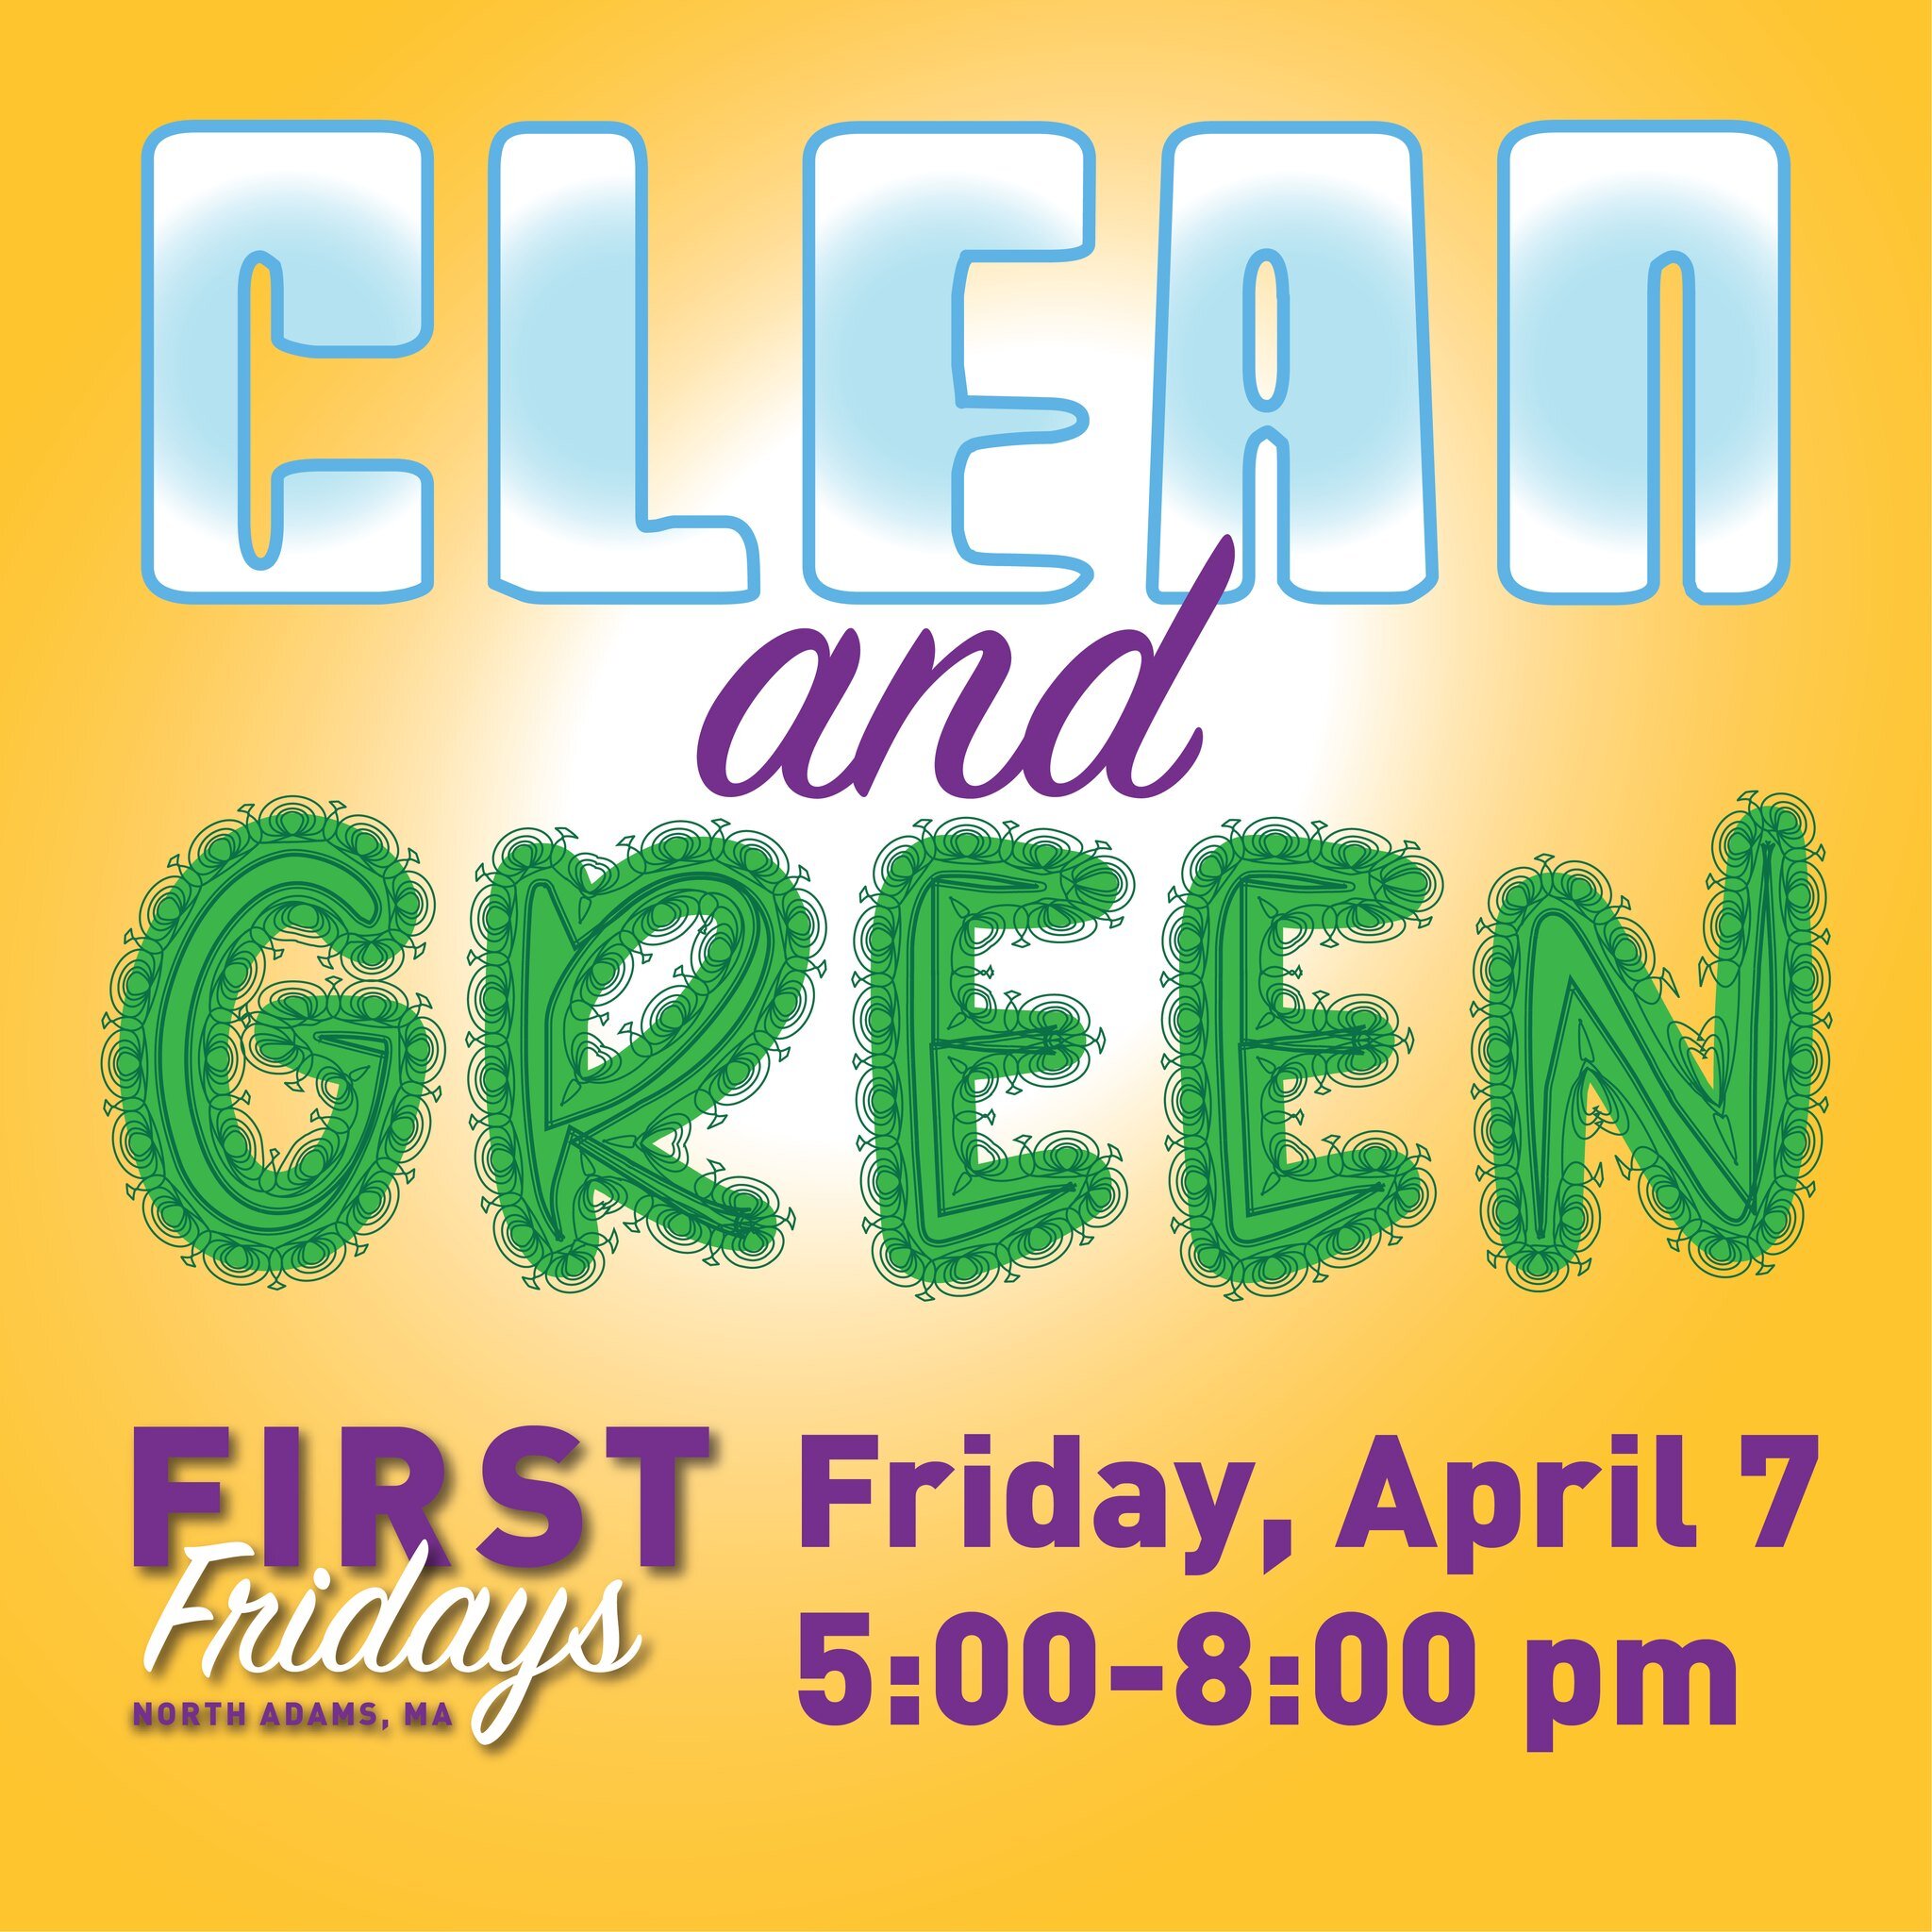 April's FIRST Friday event will focus on helping North Adams become more Clean &amp; Green.
Several of our downtown shops, galleries, restaurants, and our First Friday crew will be organizing events focused on sustainability, as Earth Day approaches.